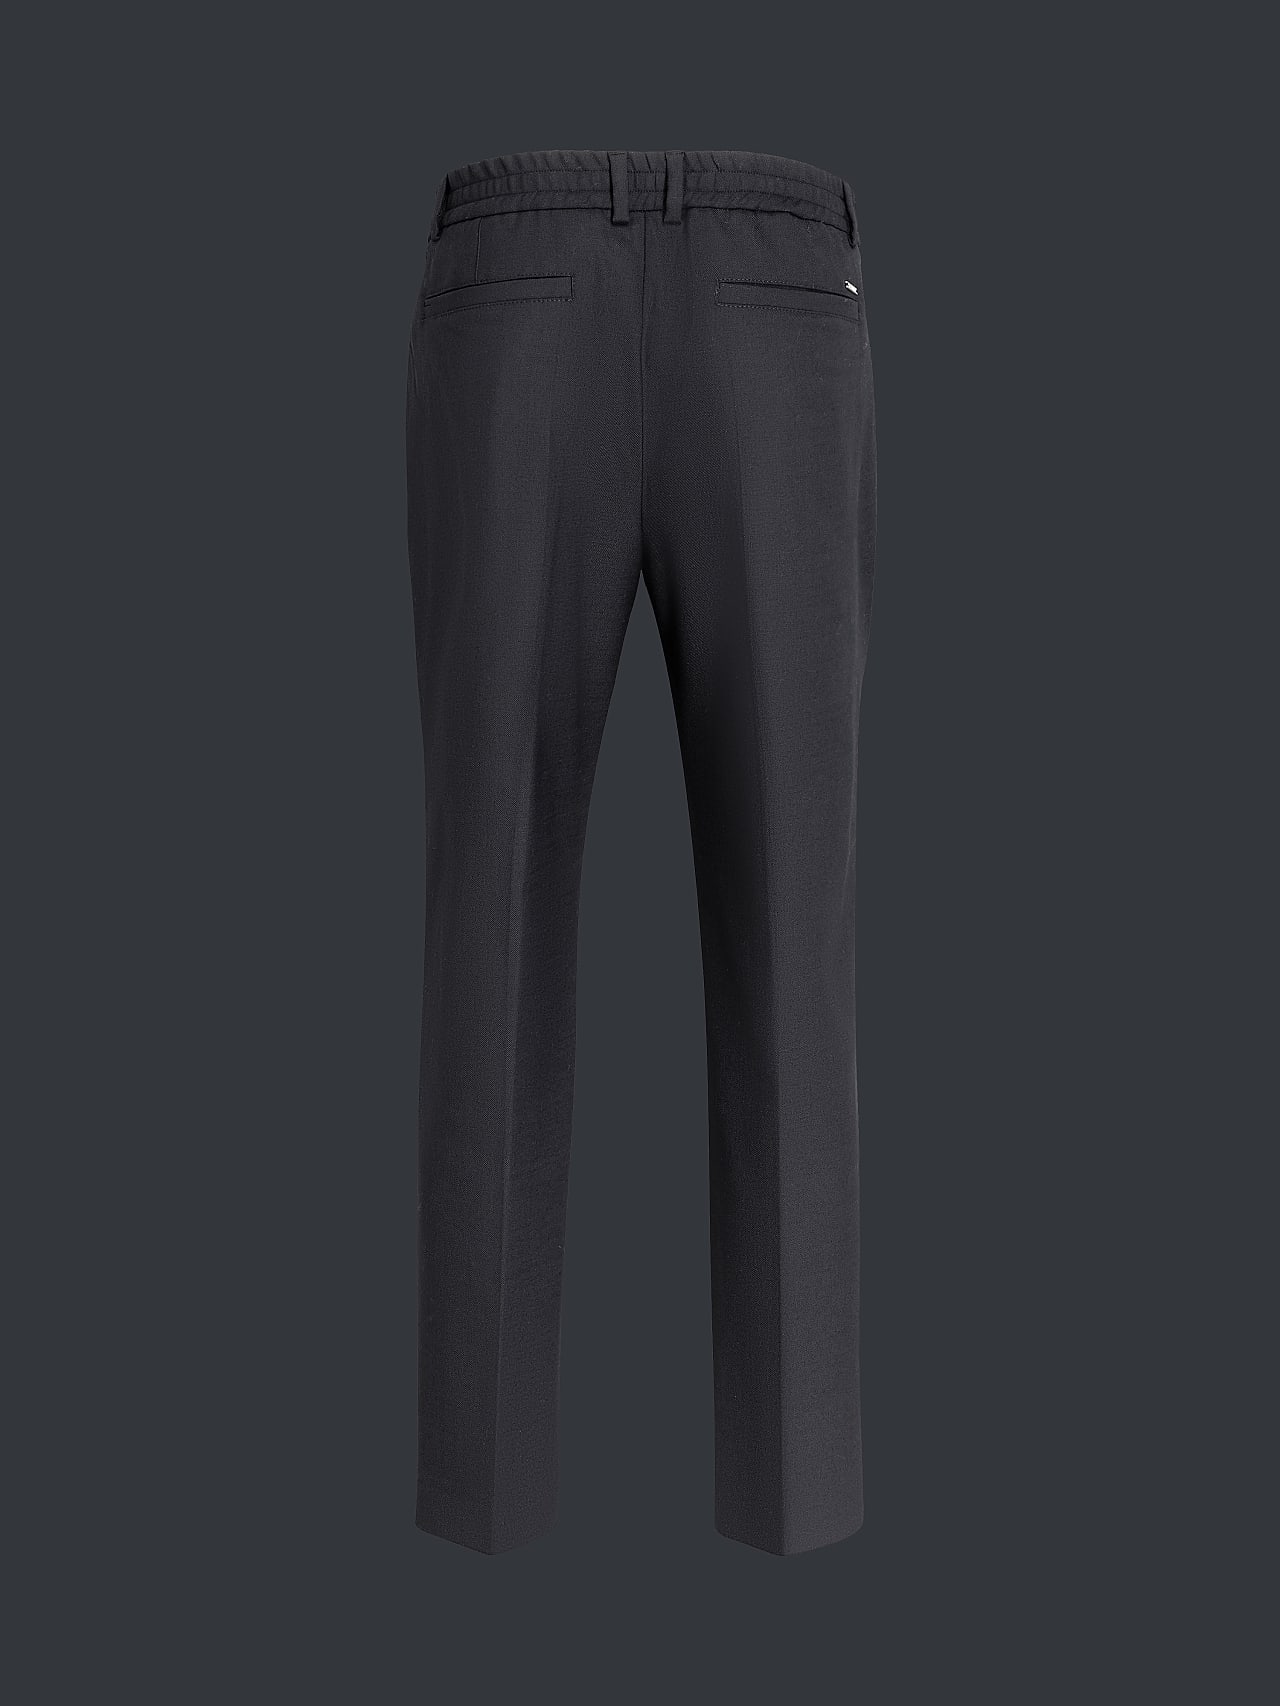 Lars Amadeus Men's Tapered Pants Expandable Waist Stretch Pleated Front  Trousers - Walmart.com